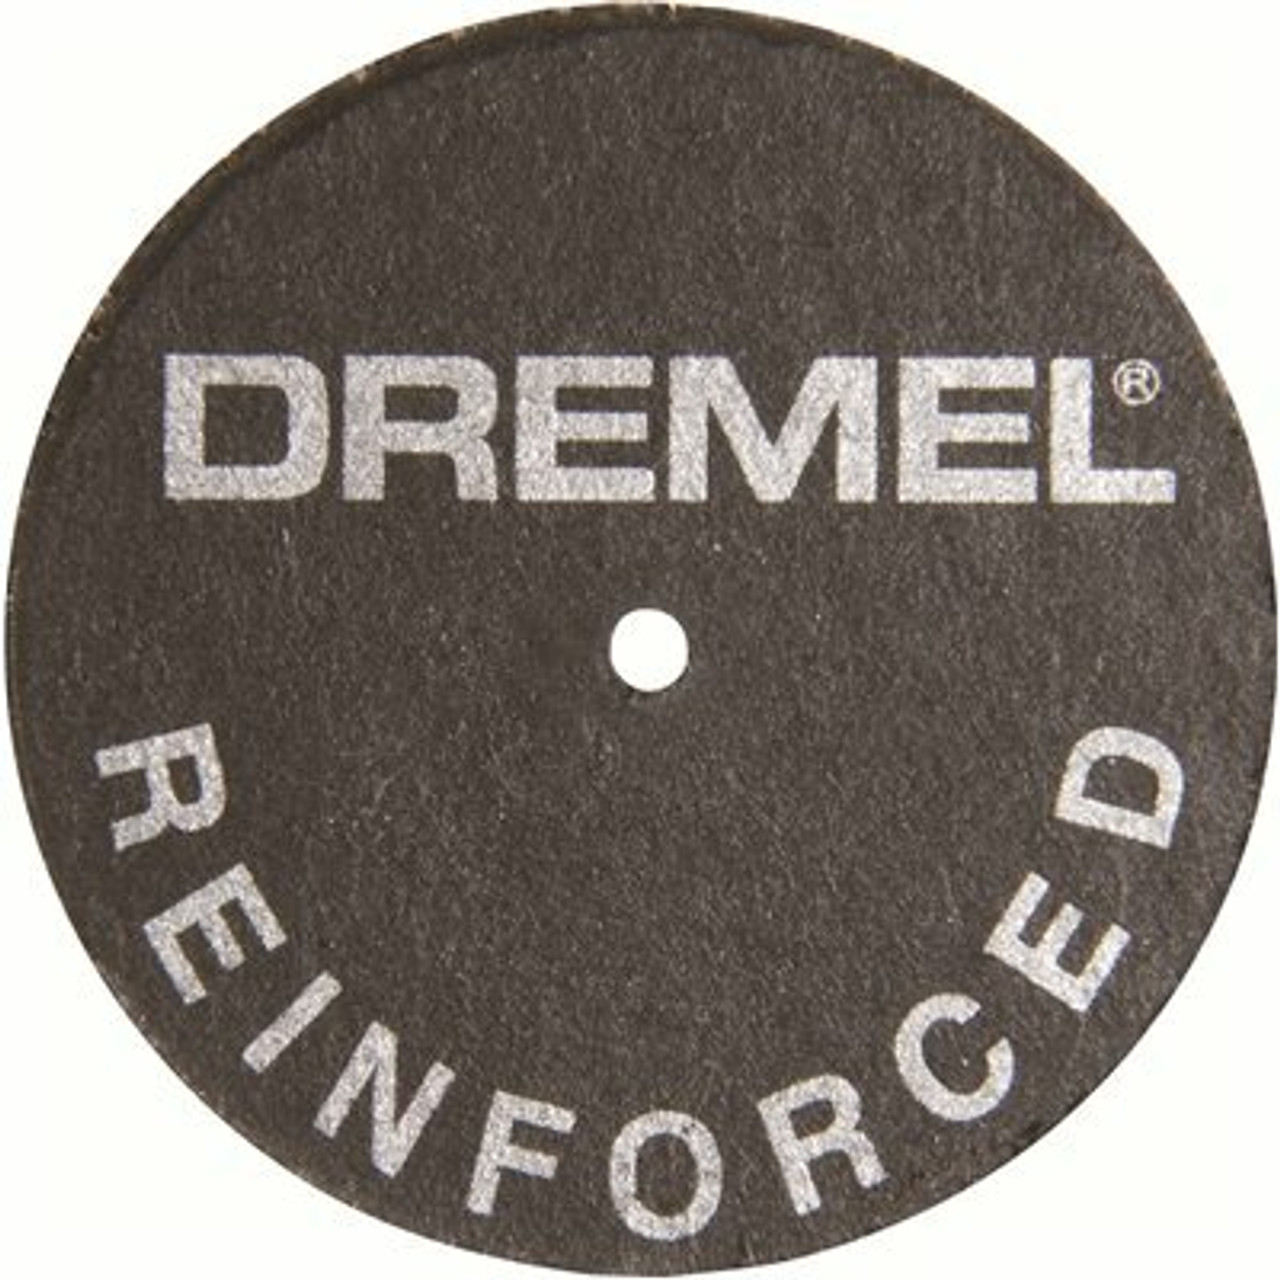 Dremel 1-1/4 In. Rotary Tool Fiberglass Reinforced Cut-Off Wheels For Cutting Metal Including Hardened Steel (5-Pack)